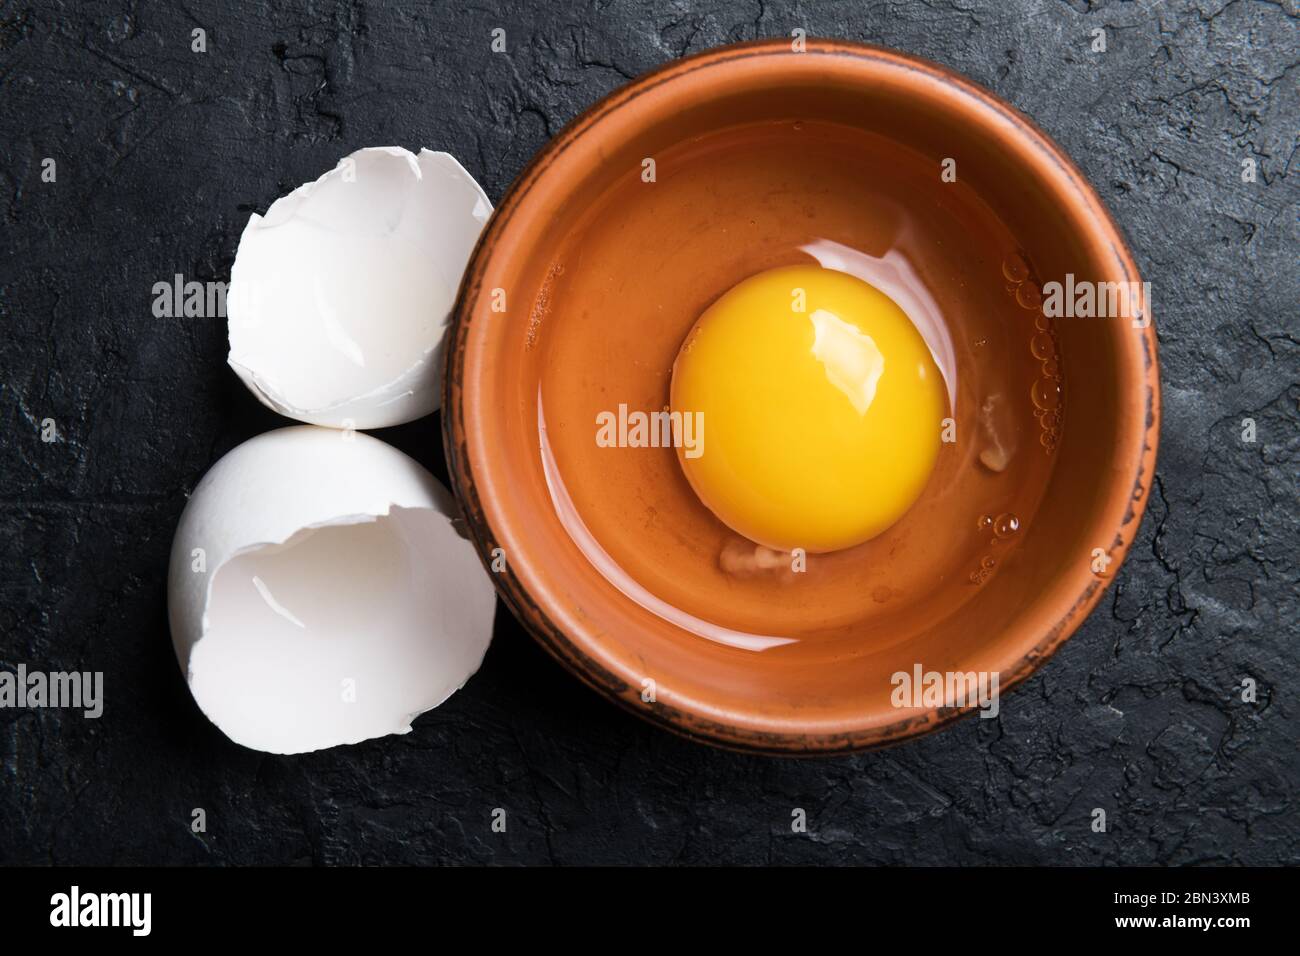 Chicken yolk from broken organic egg in brown plate on black concrete background. Food photography Stock Photo